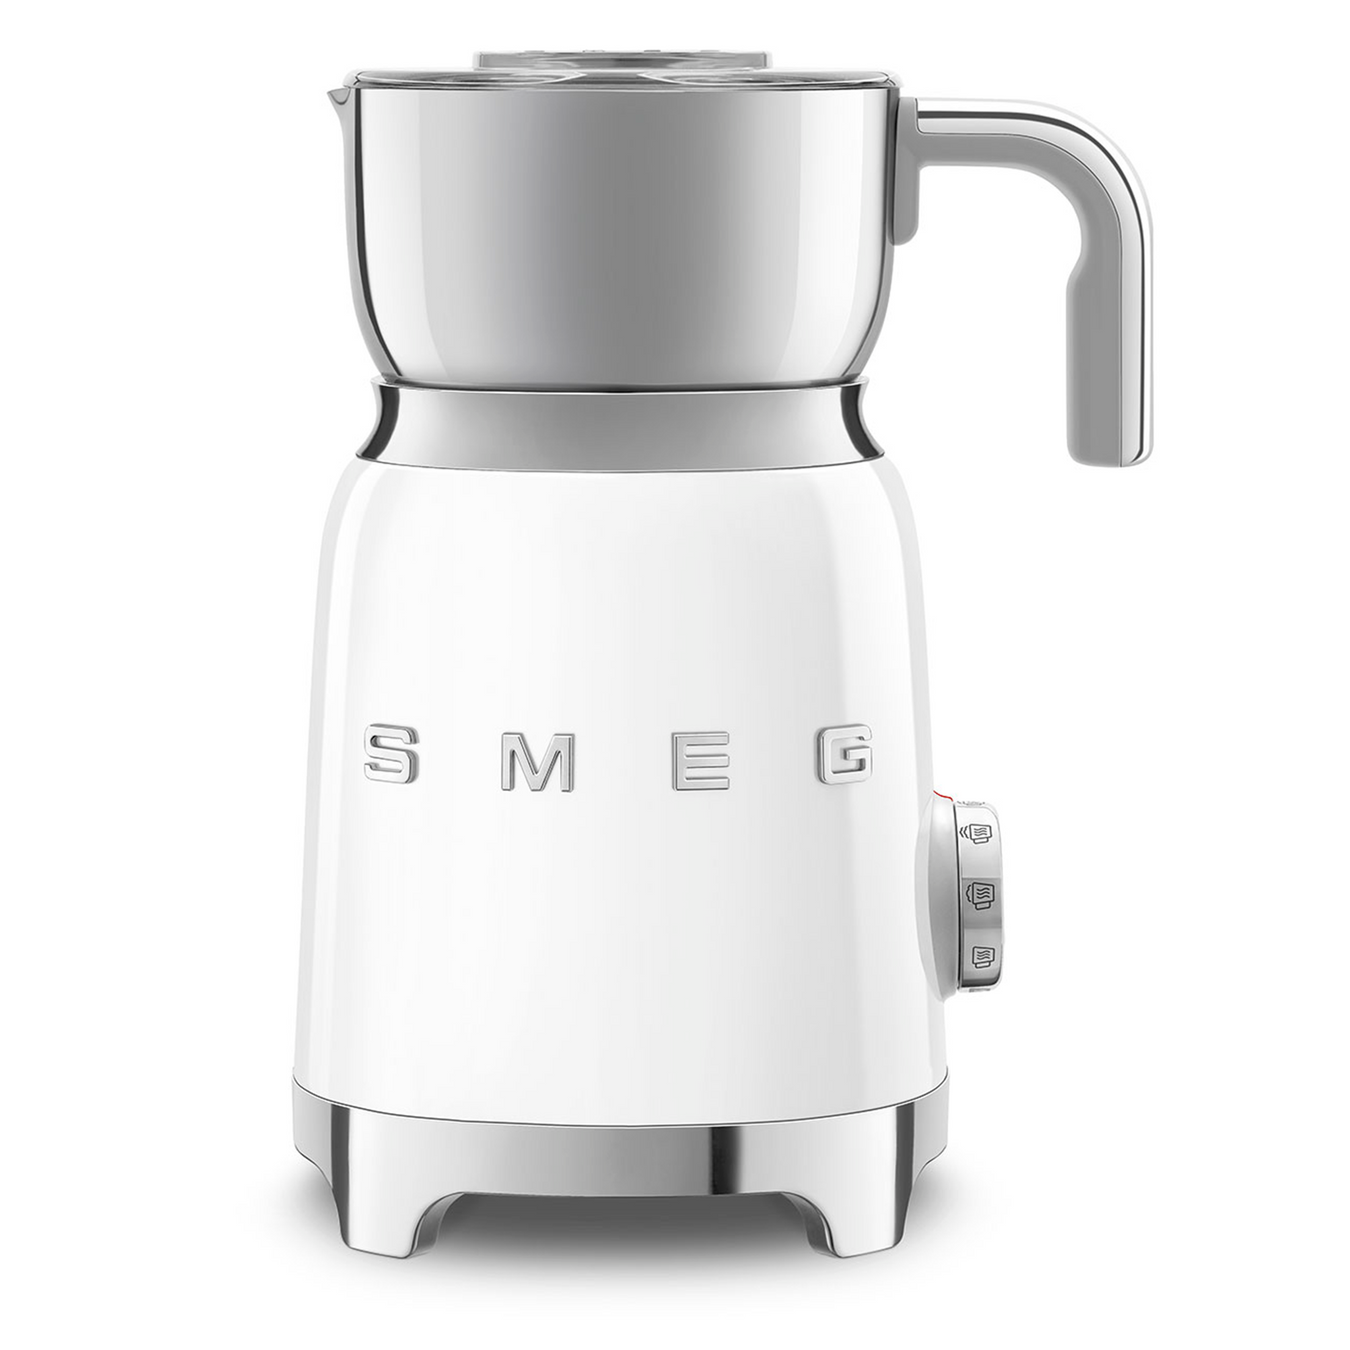 Smeg Milk Frothers